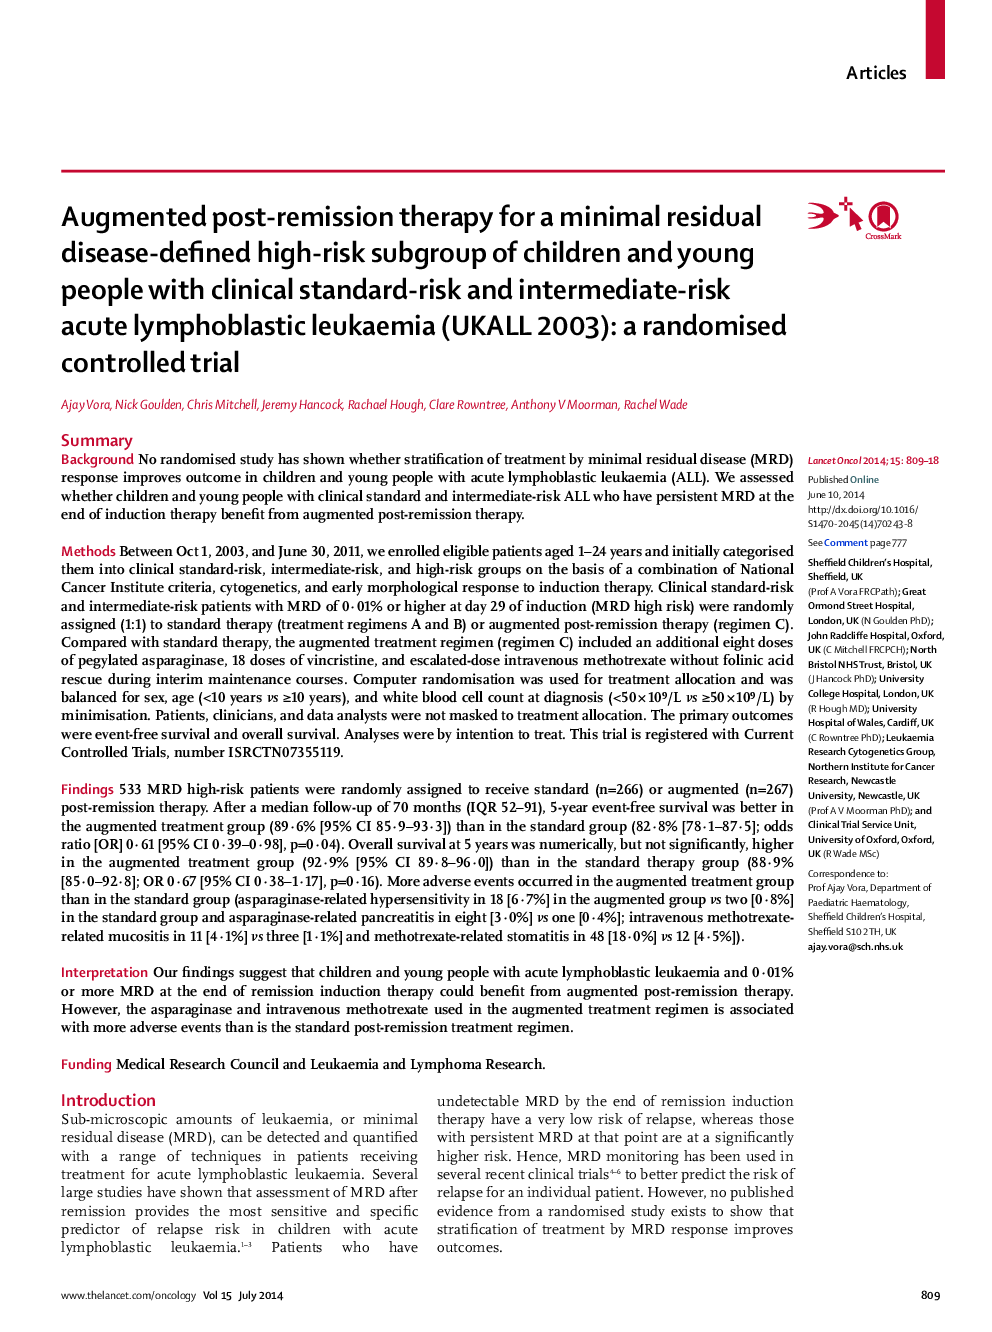 Augmented post-remission therapy for a minimal residual disease-defined high-risk subgroup of children and young people with clinical standard-risk and intermediate-risk acute lymphoblastic leukaemia (UKALL 2003): a randomised controlled trial